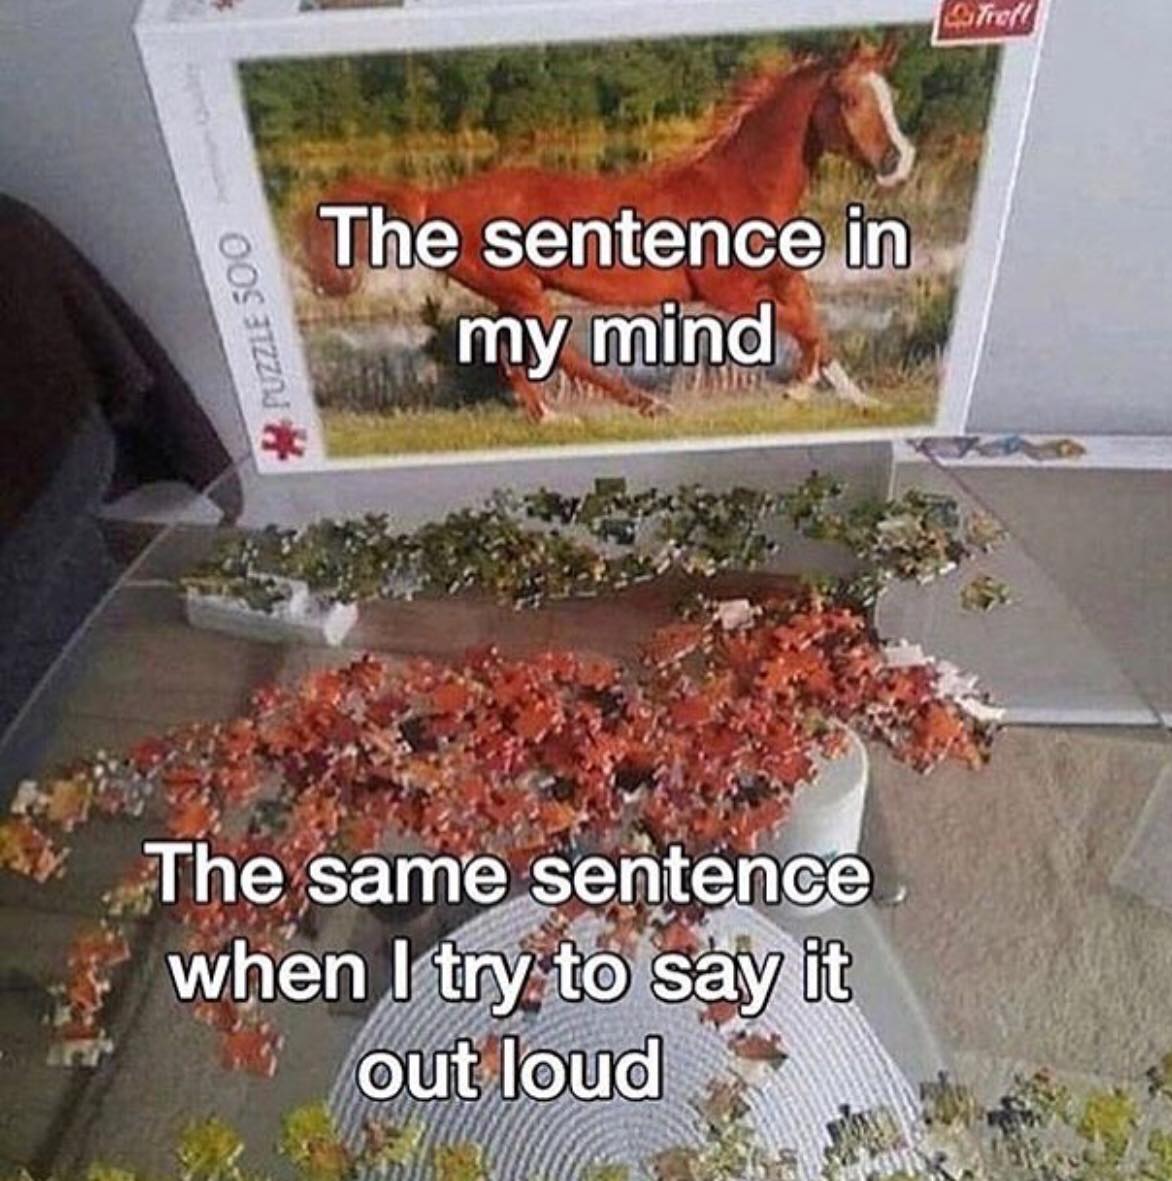 sentence in my mind - atroll Puzzle 500 The sentence in my mind The same sentence when I try to say it out loud